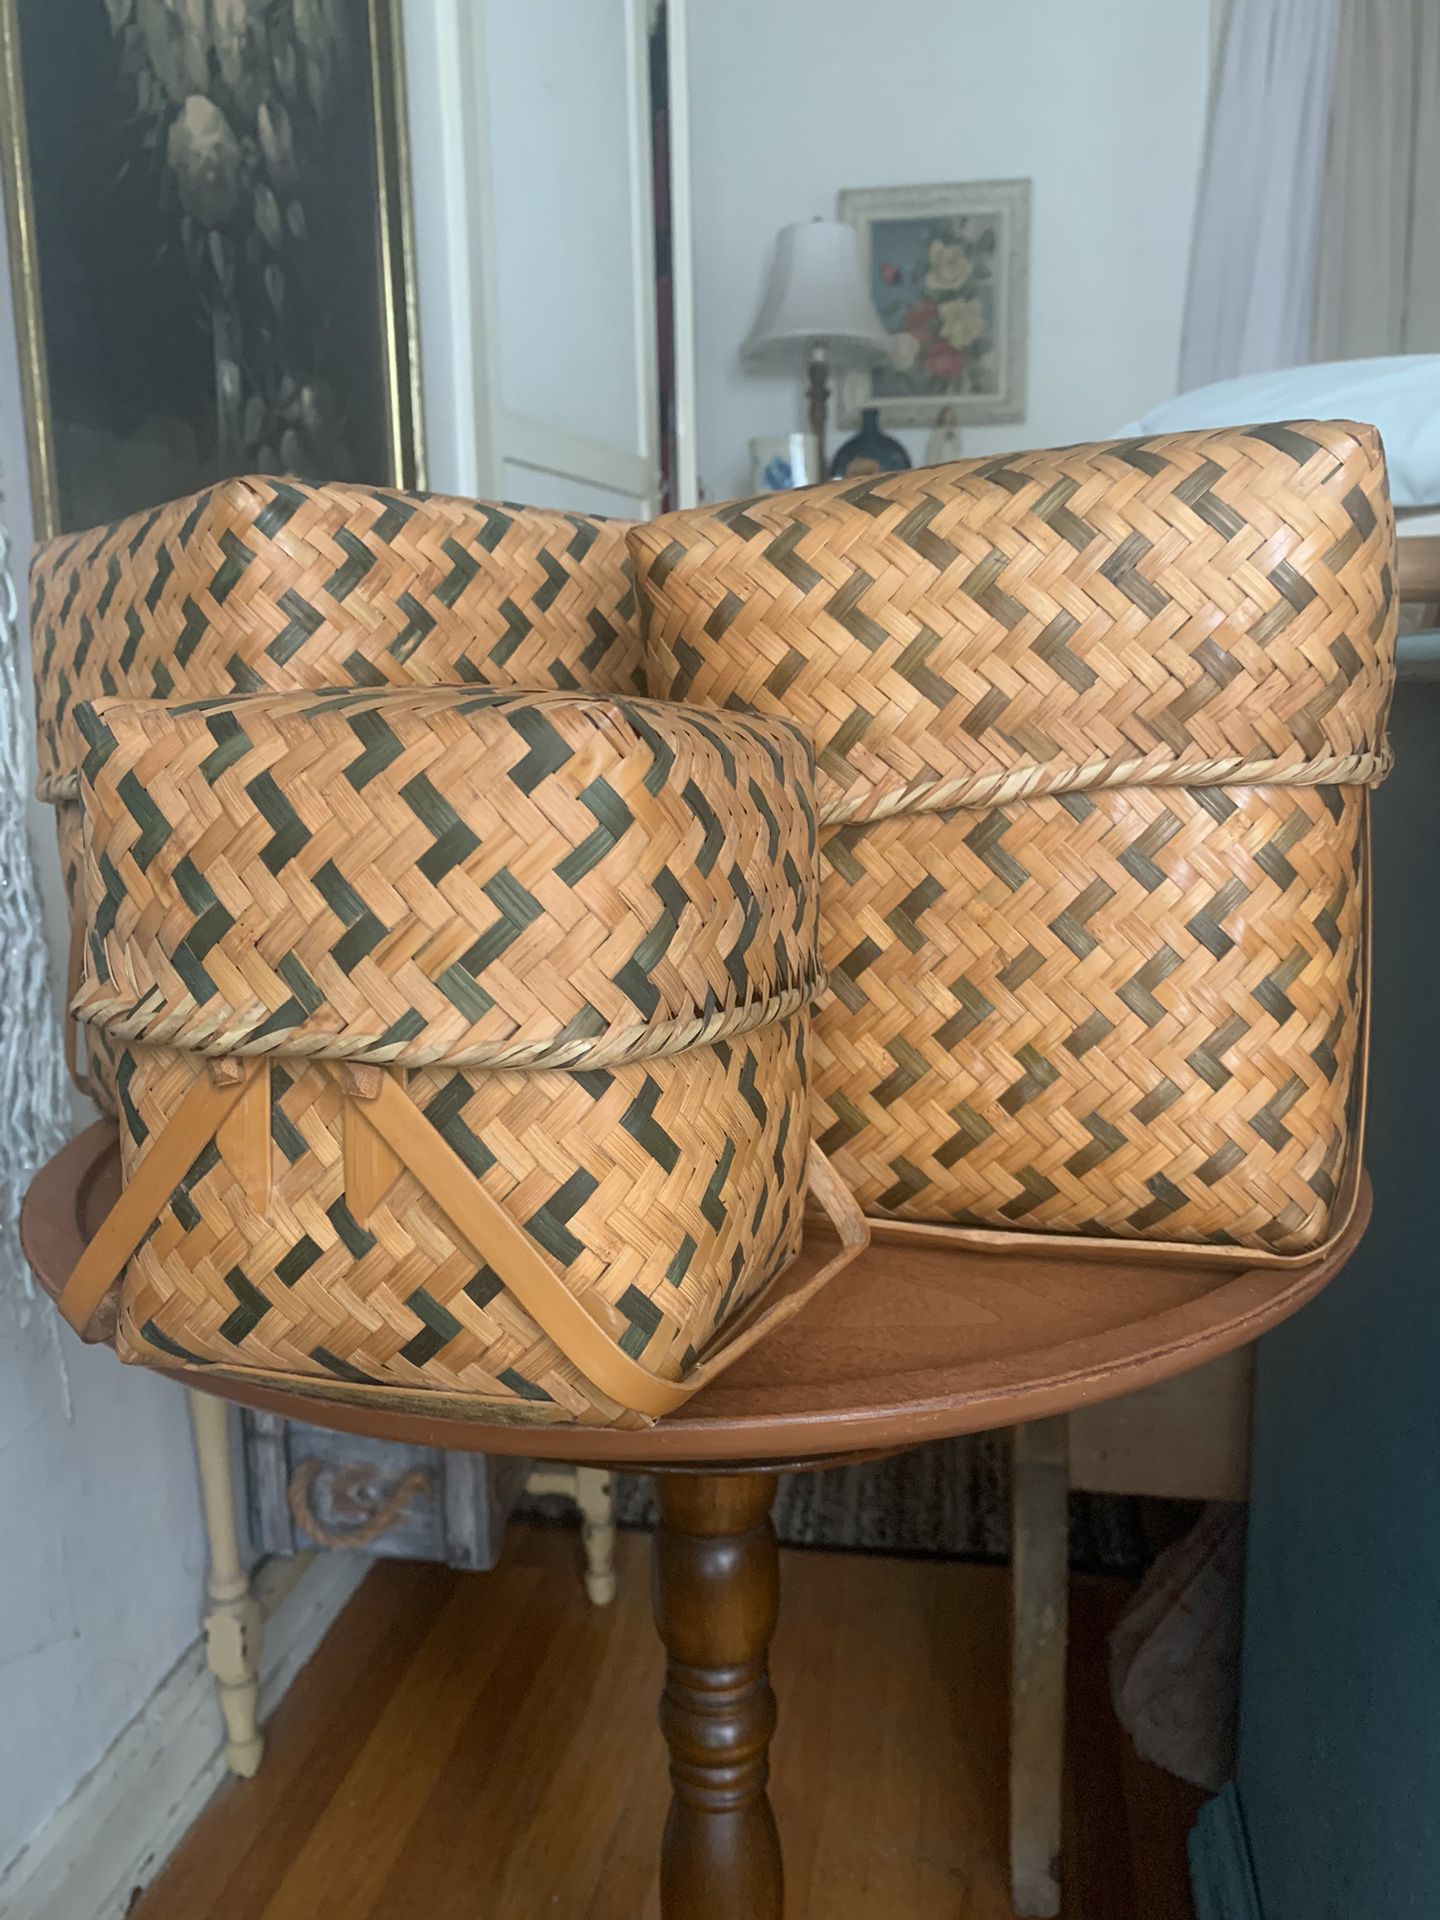 Set of 3 Imported Decorative Storage Baskets with Lids & Handles